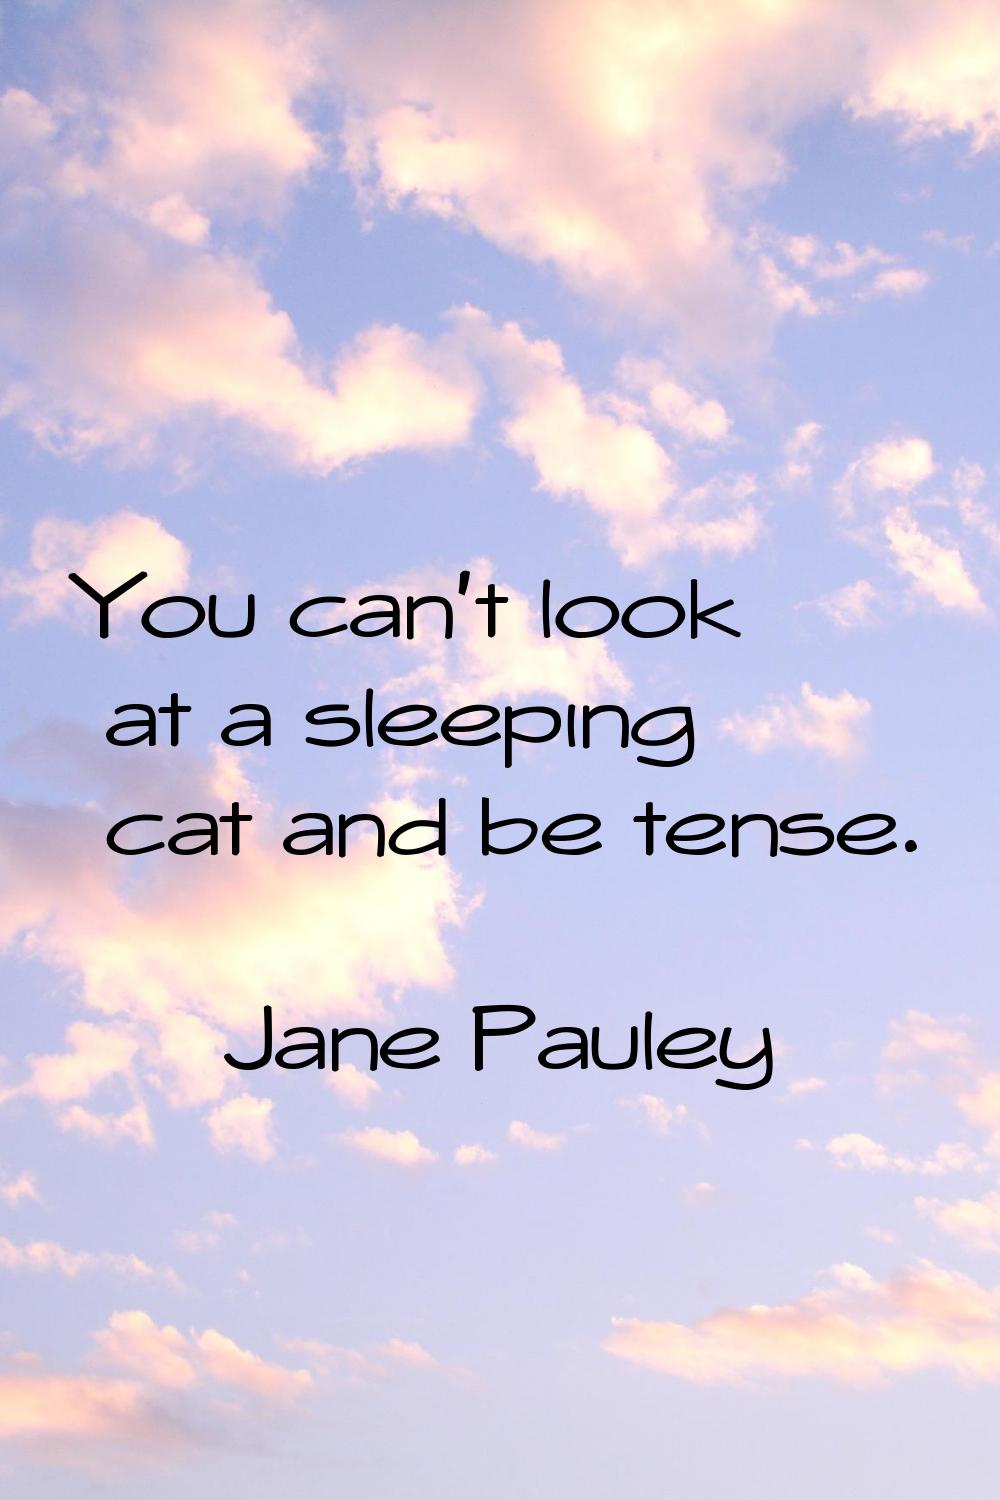 You can't look at a sleeping cat and be tense.